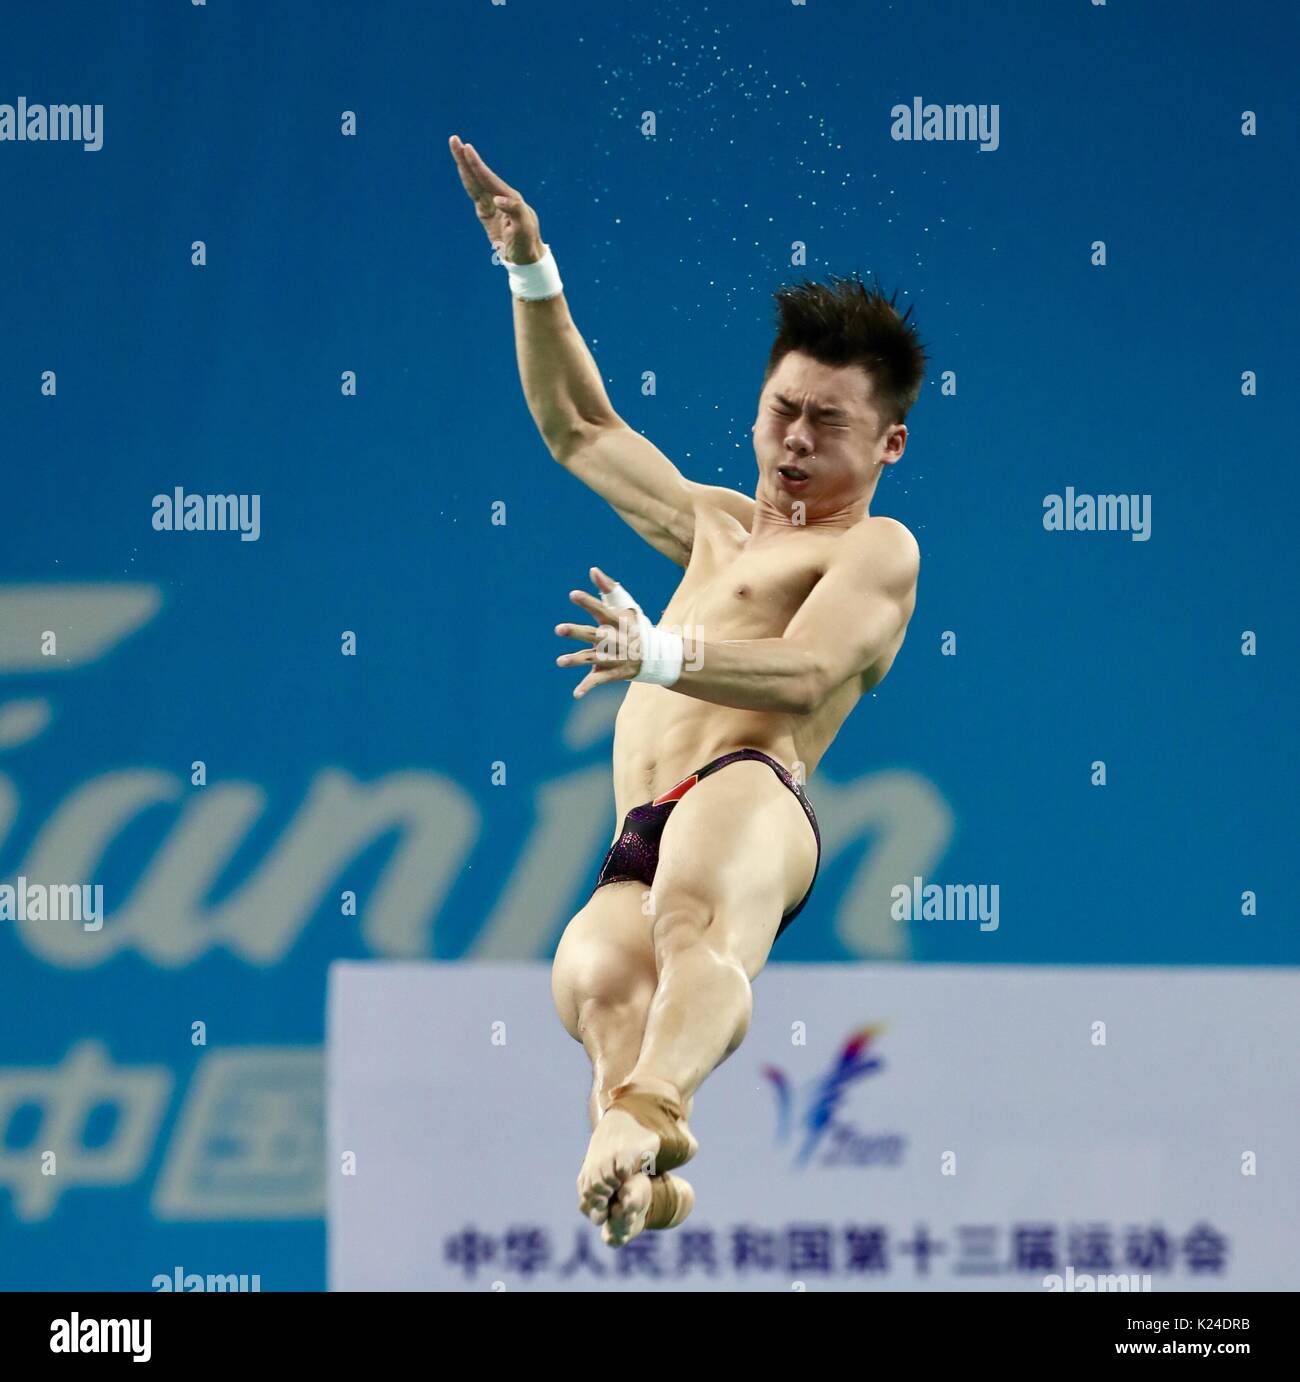 Tianjin. 28th Aug, 2017. Chen Aisen of Guangdong competes during the men's 10m platform final of Diving at the 13th Chinese National Games in north China's Tianjin Municipality, Aug. 28, 2017. Chen Aisen claimed the title with 613.55 points. Credit: Ding Xu/Xinhua/Alamy Live News Stock Photo